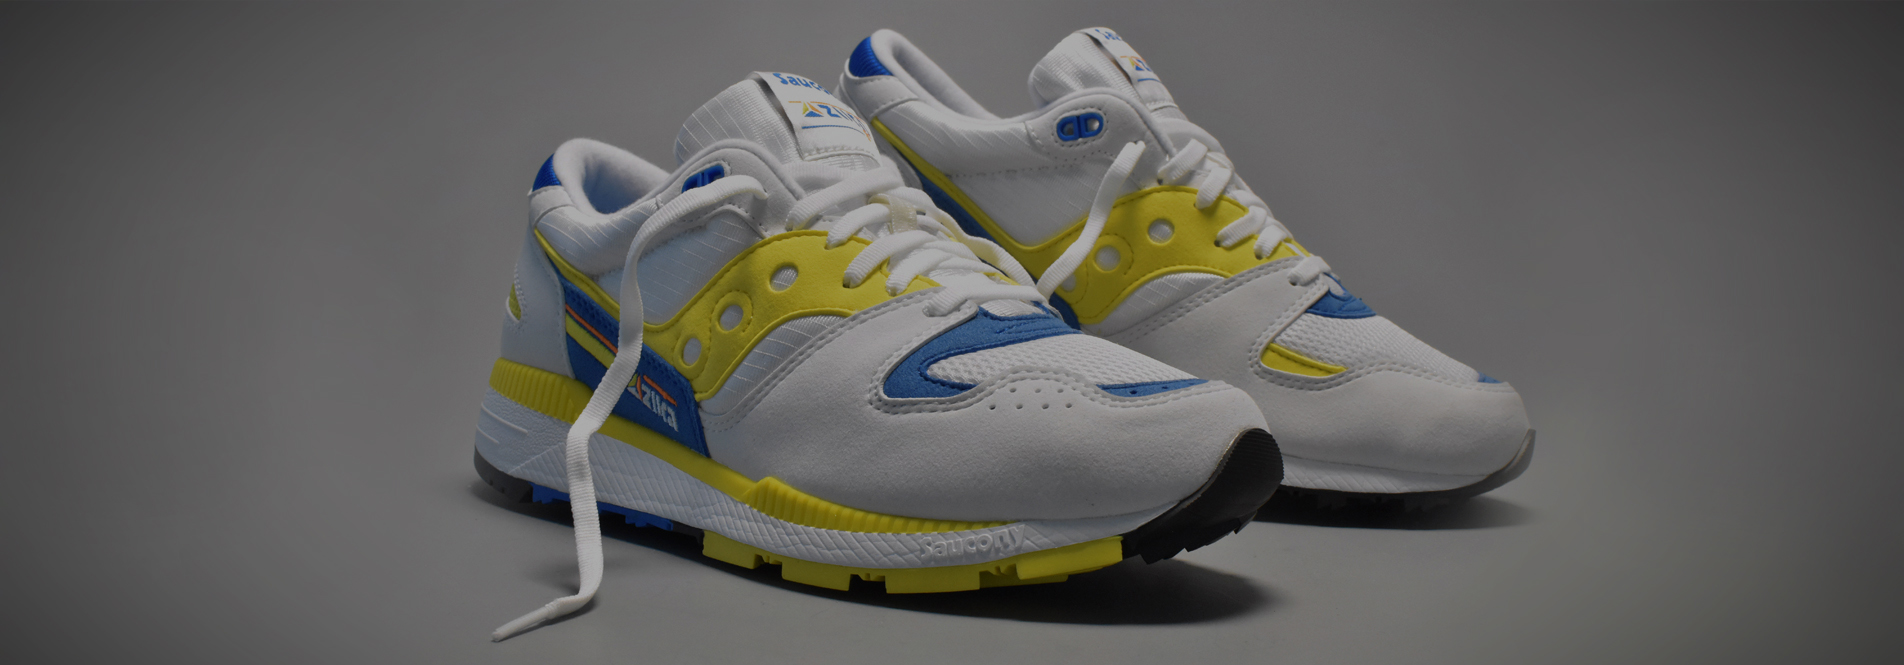 index.php?main_page=advanced_search_result&search_in_description=1&keyword=Scarpe+Running+Saucony